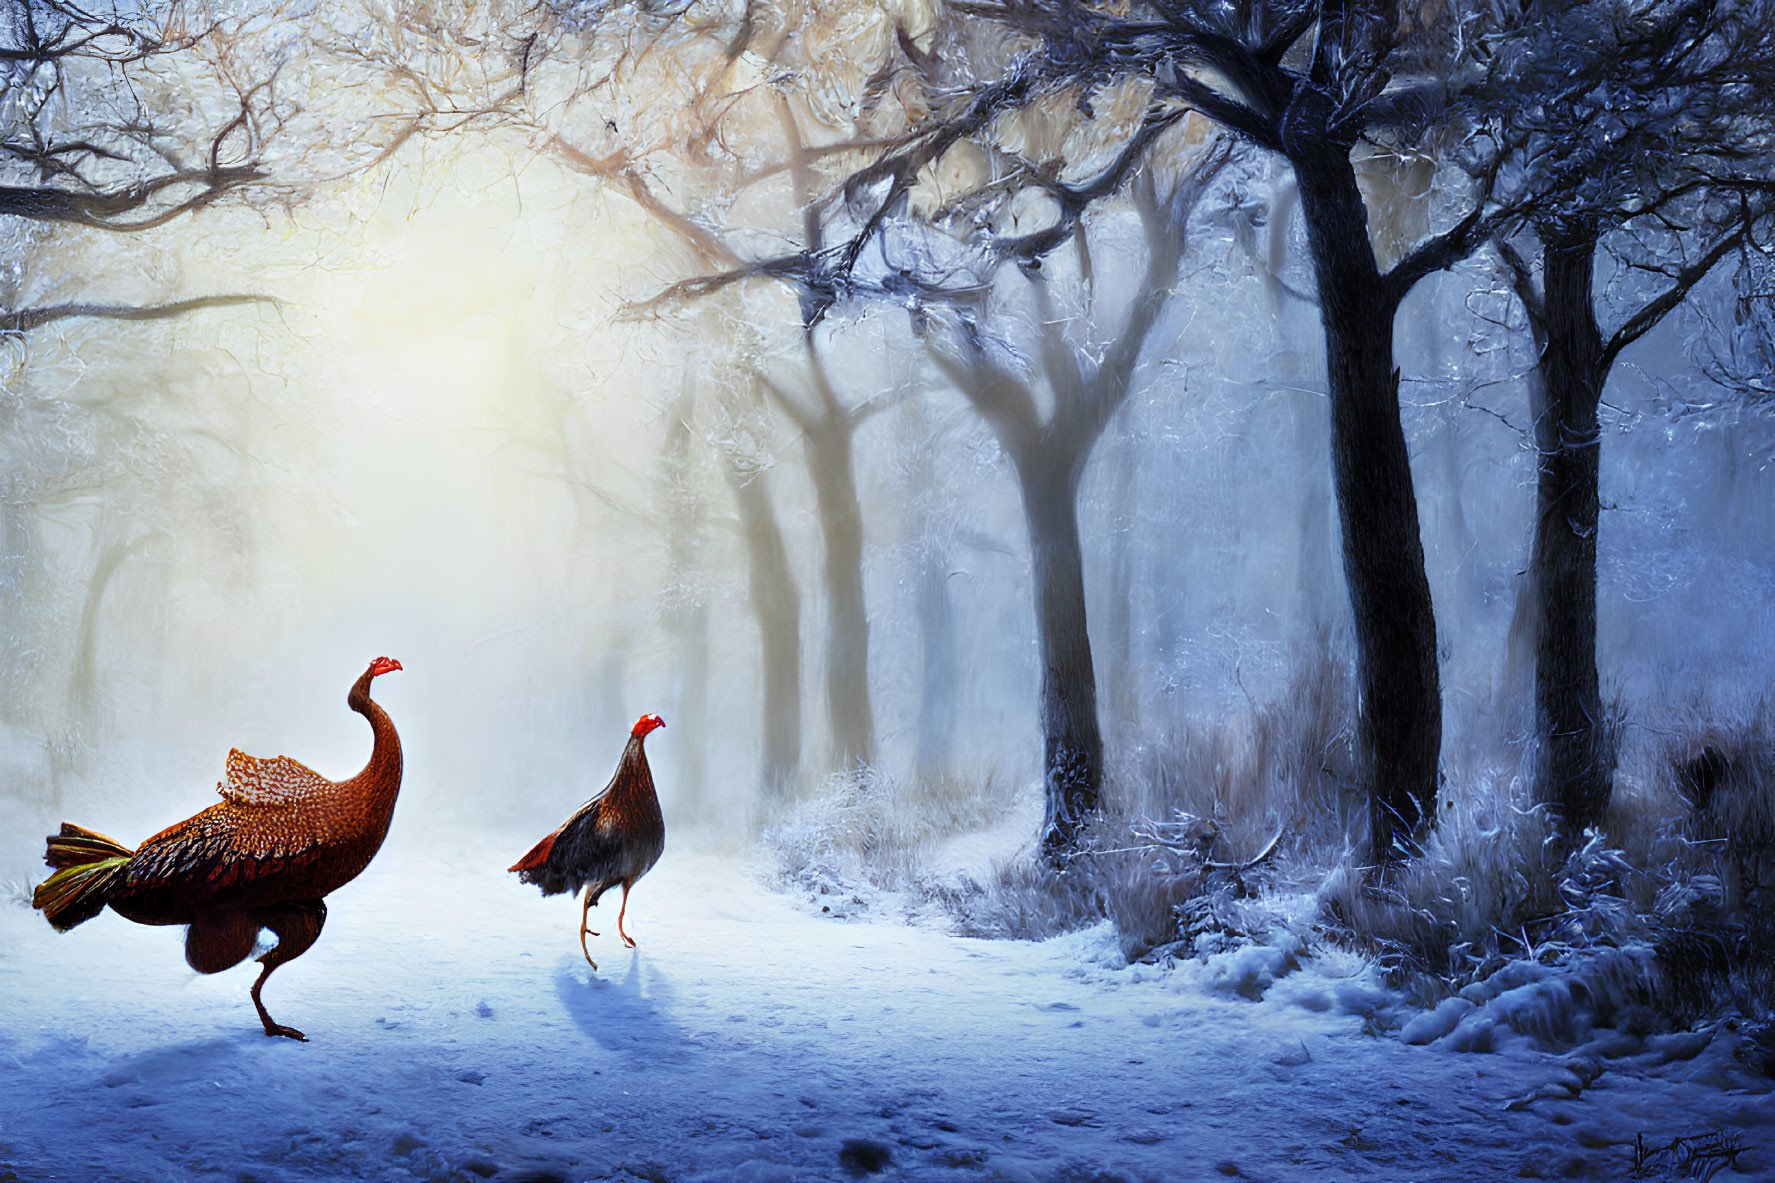 Snowy forest scene with two pheasants and sunrays through mist and trees